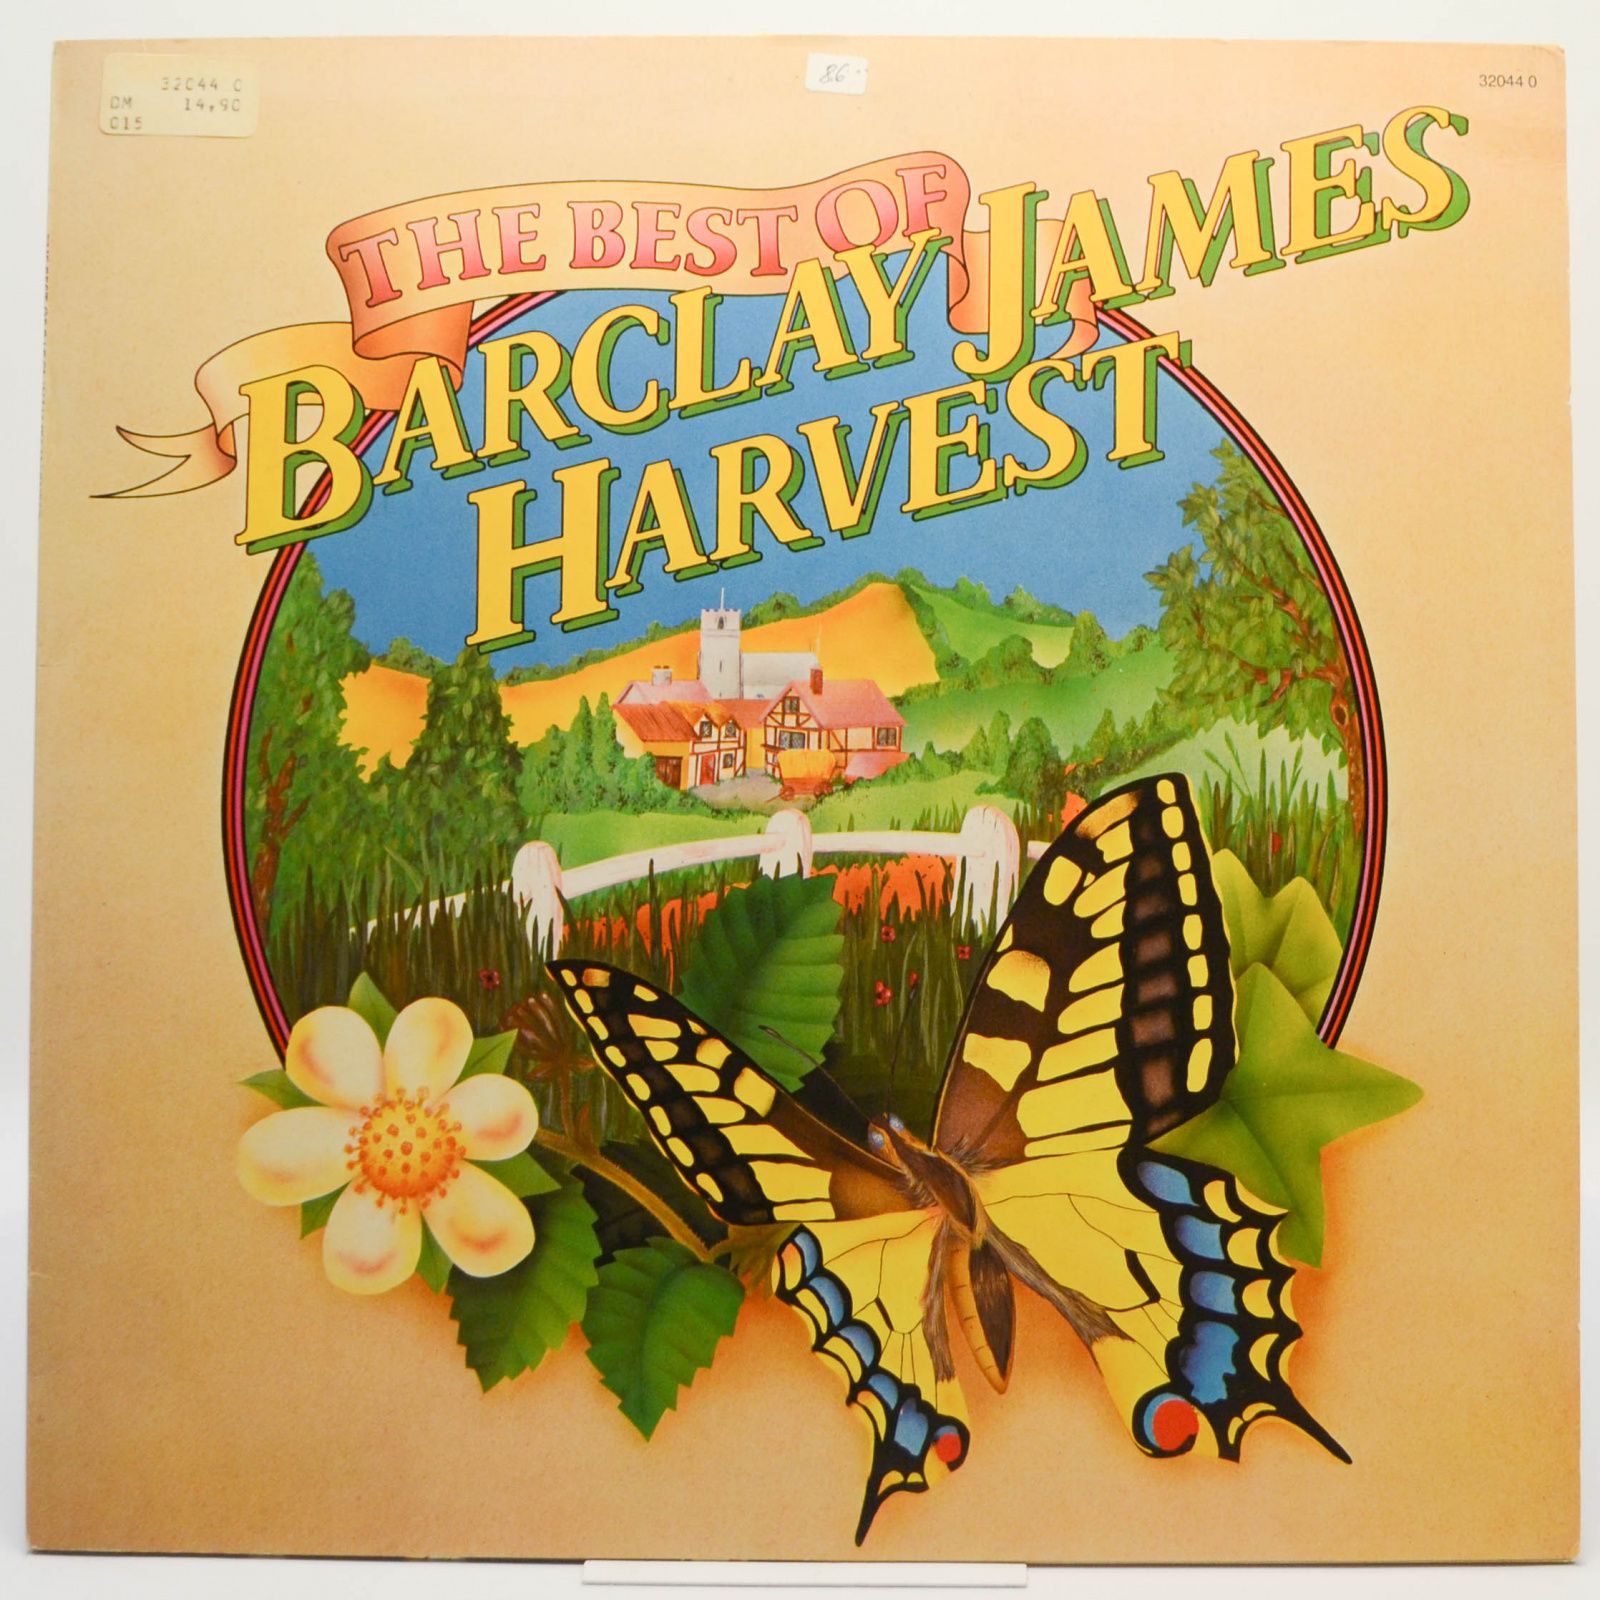 Barclay James Harvest — The Best Of Barclay James Harvest, 1977